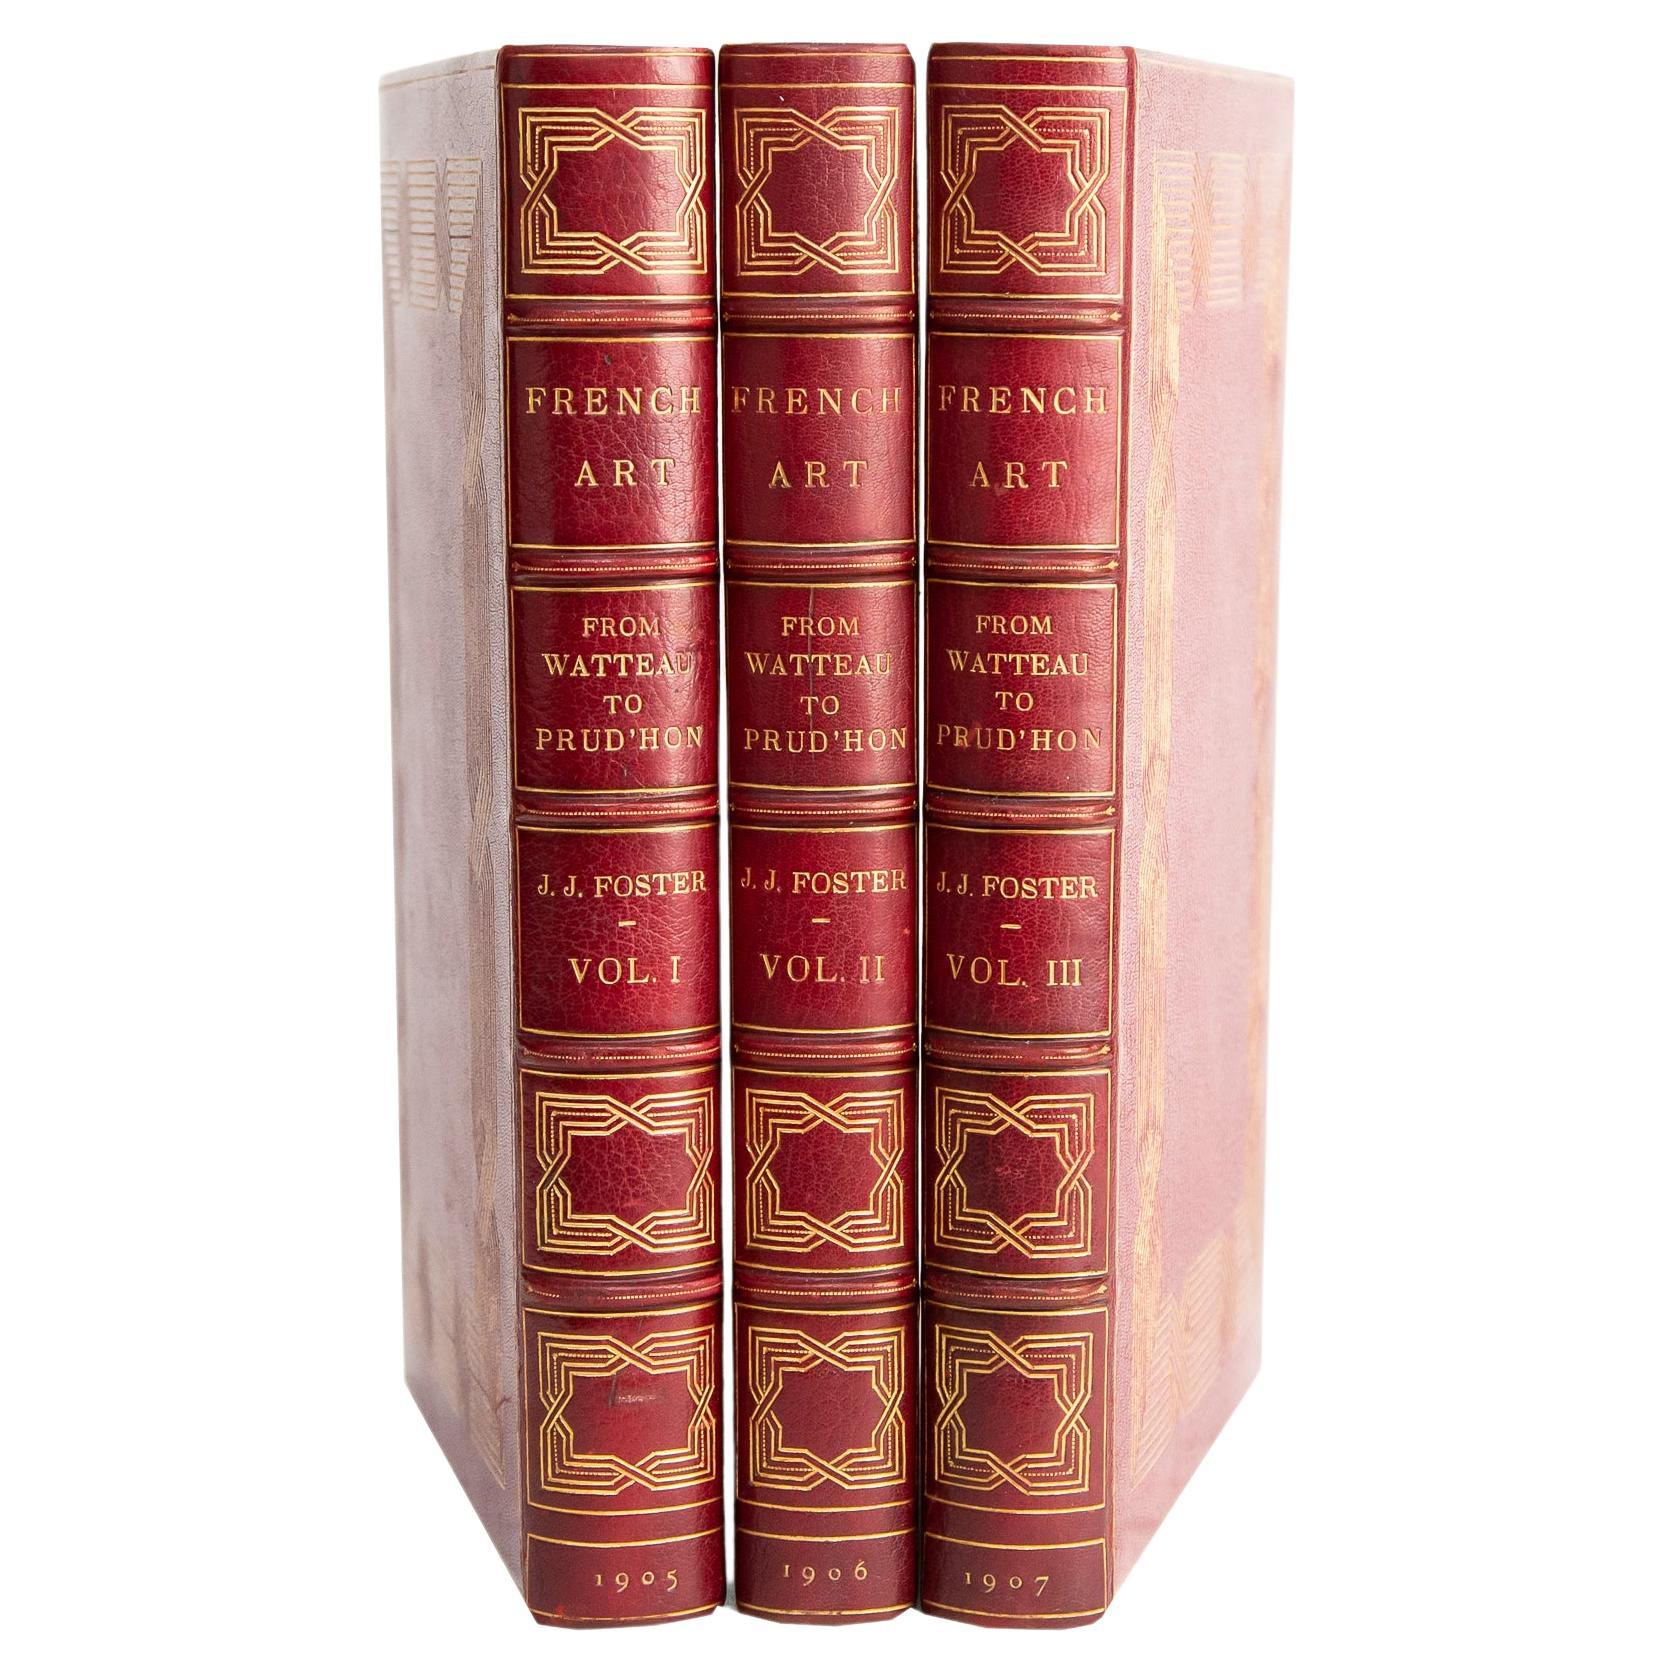 3 Volumes. J.J. Foster, French Art from Watteau to Prud'hon